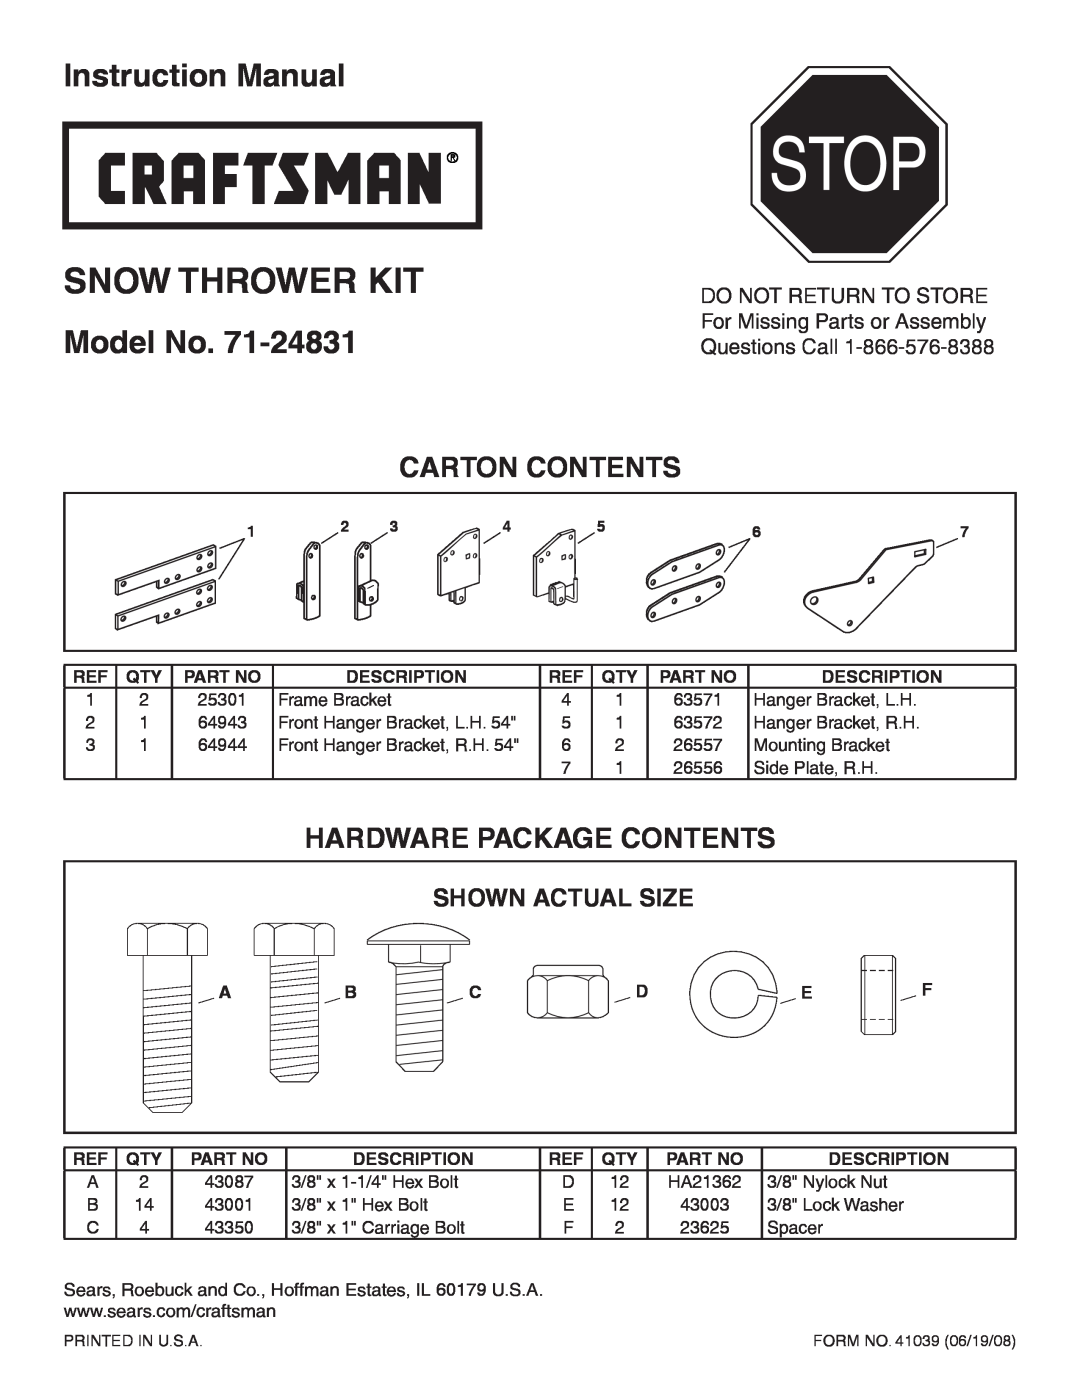 Craftsman 71-24831 instruction manual Stop, Snow Thrower Kit, Model No, Carton Contents, Hardware Package Contents 